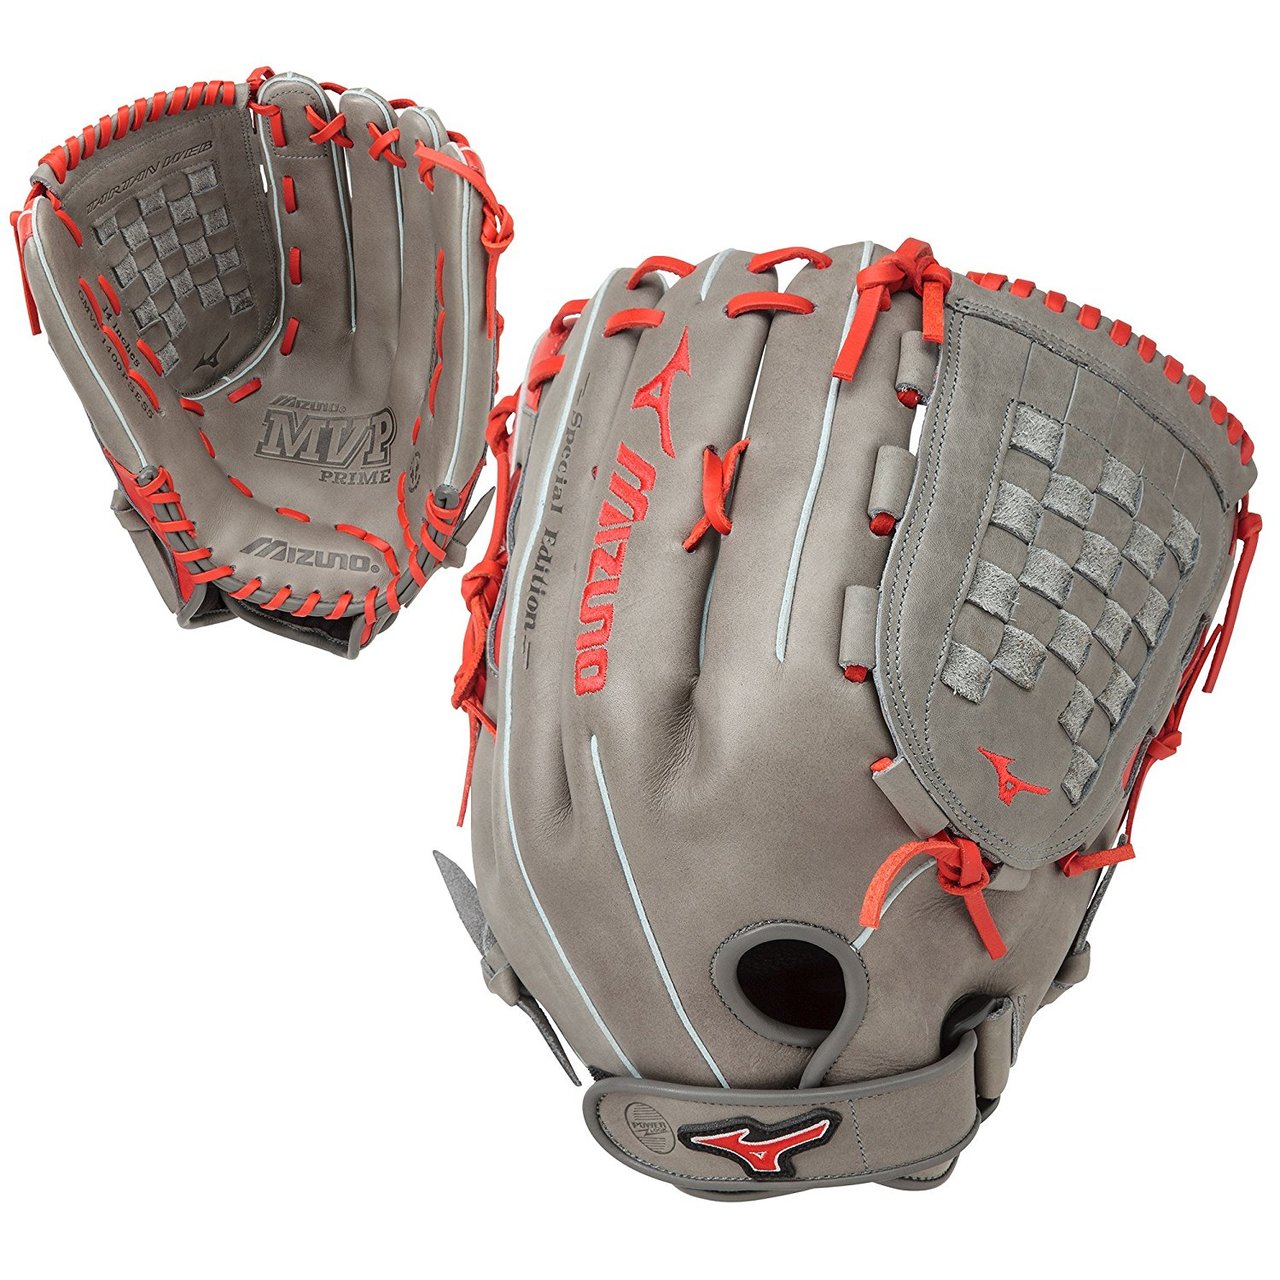 The Special Edition MVP Prime Slowpitch Series lives up to Mizuno's high standards and provides players with a professional-style glove at an affordable price. Professional style smooth Bio Soft Leather has the perfect balance of oil and softness for exceptional feel and firm control that serious players demand. The MVP Prime series is made with center pocket patterns and a conventional open back for excellent control in the field. PowerLock closure is the simplest and most secure fit available. - Special Edition Colorway - 14 Inch Pattern - Tartan Web with PowerLock Closure - Center Pocket Design - Bio Soft Leather - Professional Level Lace                                                              